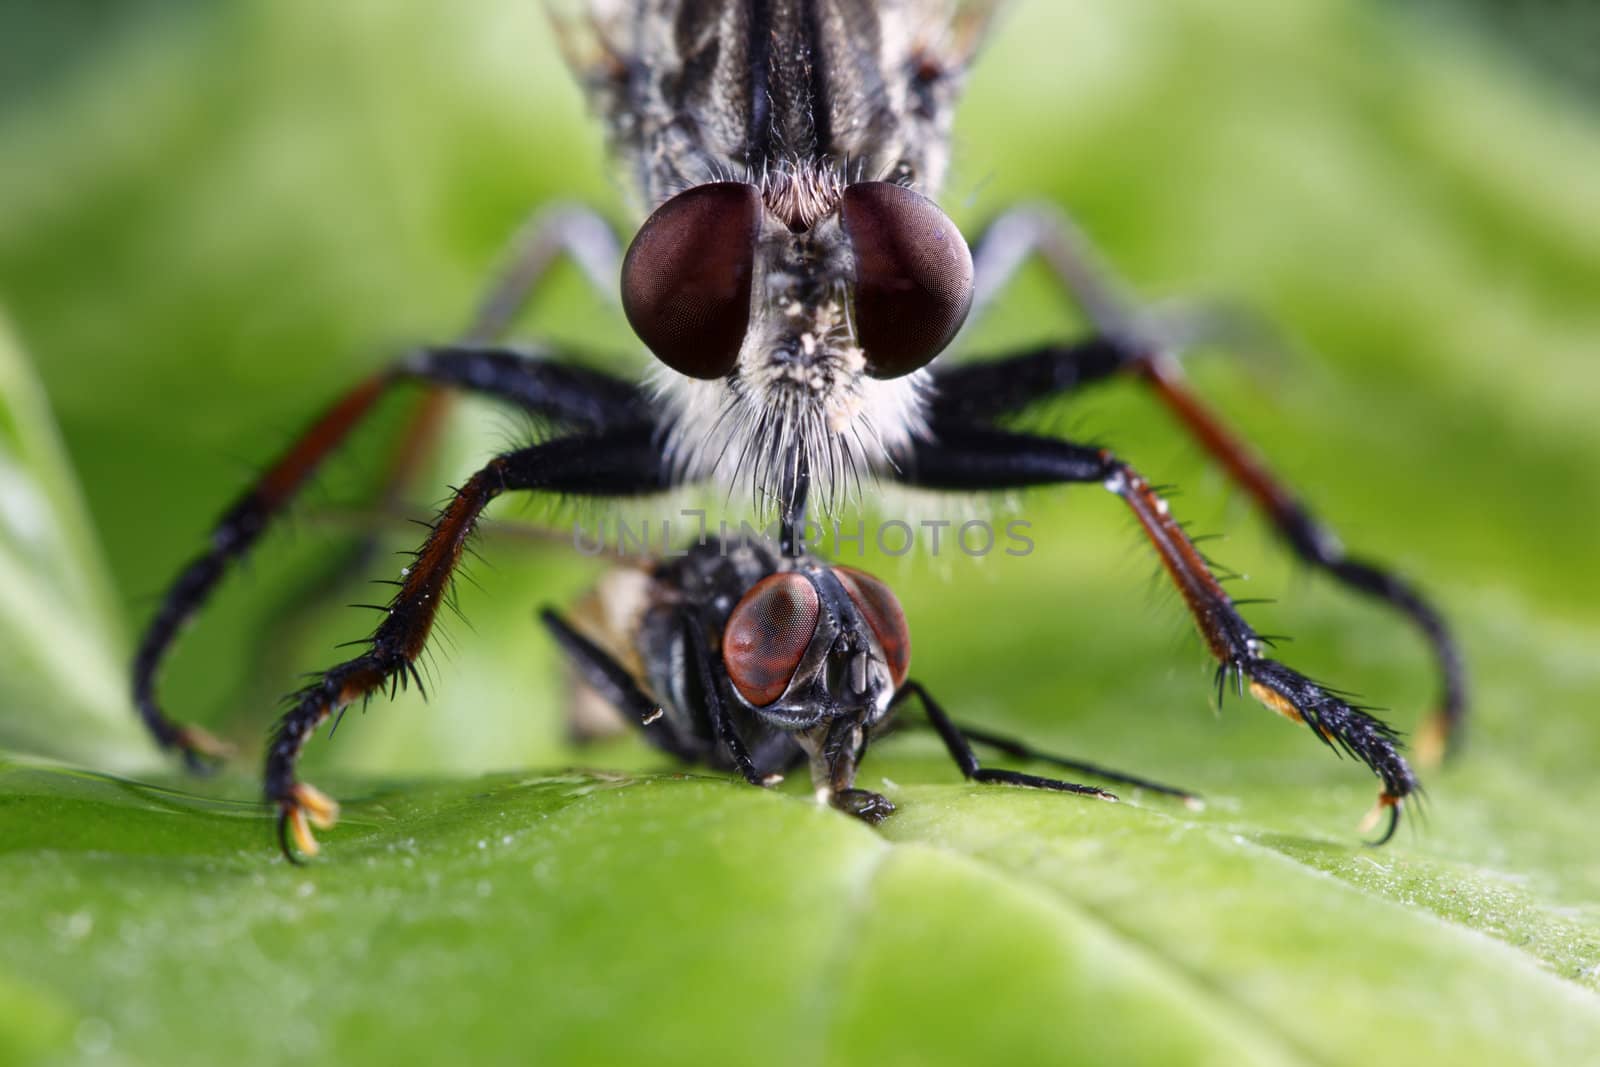 An extreme macro shot of a robber fly (Triorla interrupta) as it eats the insides of a common house fly. Robber fly's inject saliva containing neurotoxic enzymes which paralyze and digest the insides of its prey. It then sucks the liquified meal through its proboscis. Robber fly's are very aggressive hunters and will hunt other flies, beetles, butterflies, moths, bees, dragon flies, wasps, grasshoppers, and some spiders.